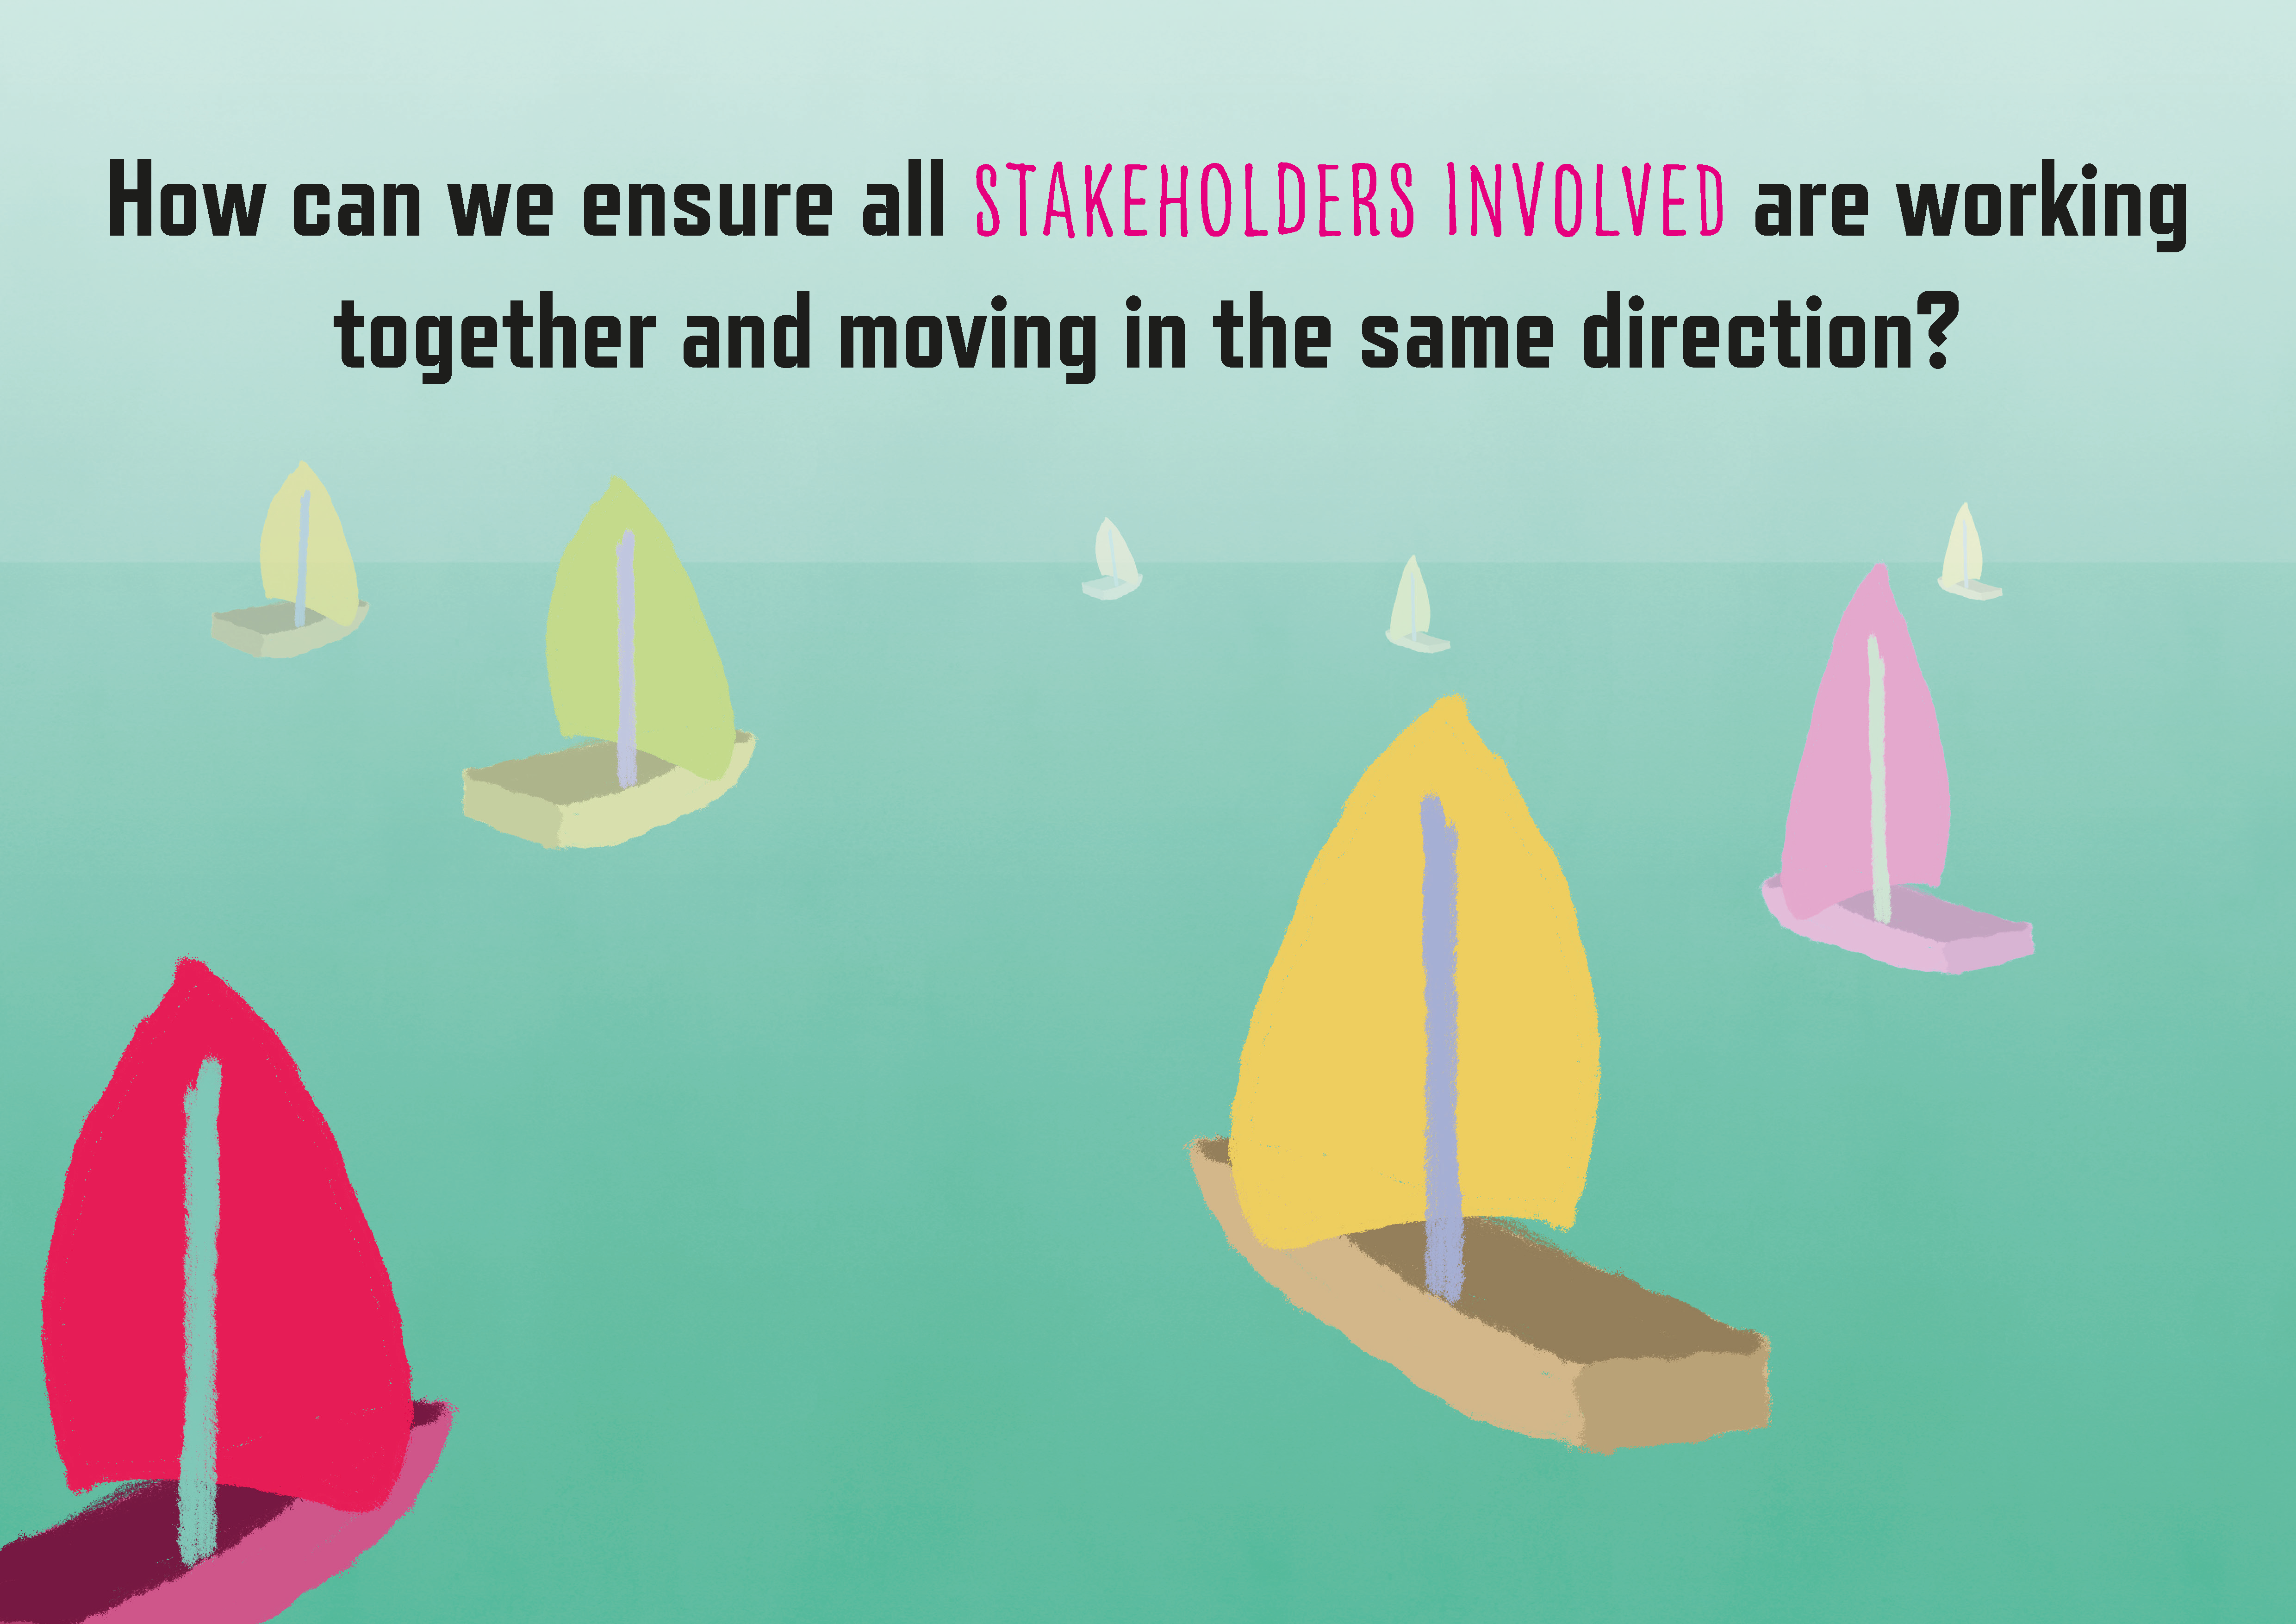 Graphic stating: How can we ensure all stakeholders involved are working together and moving in the same direction?